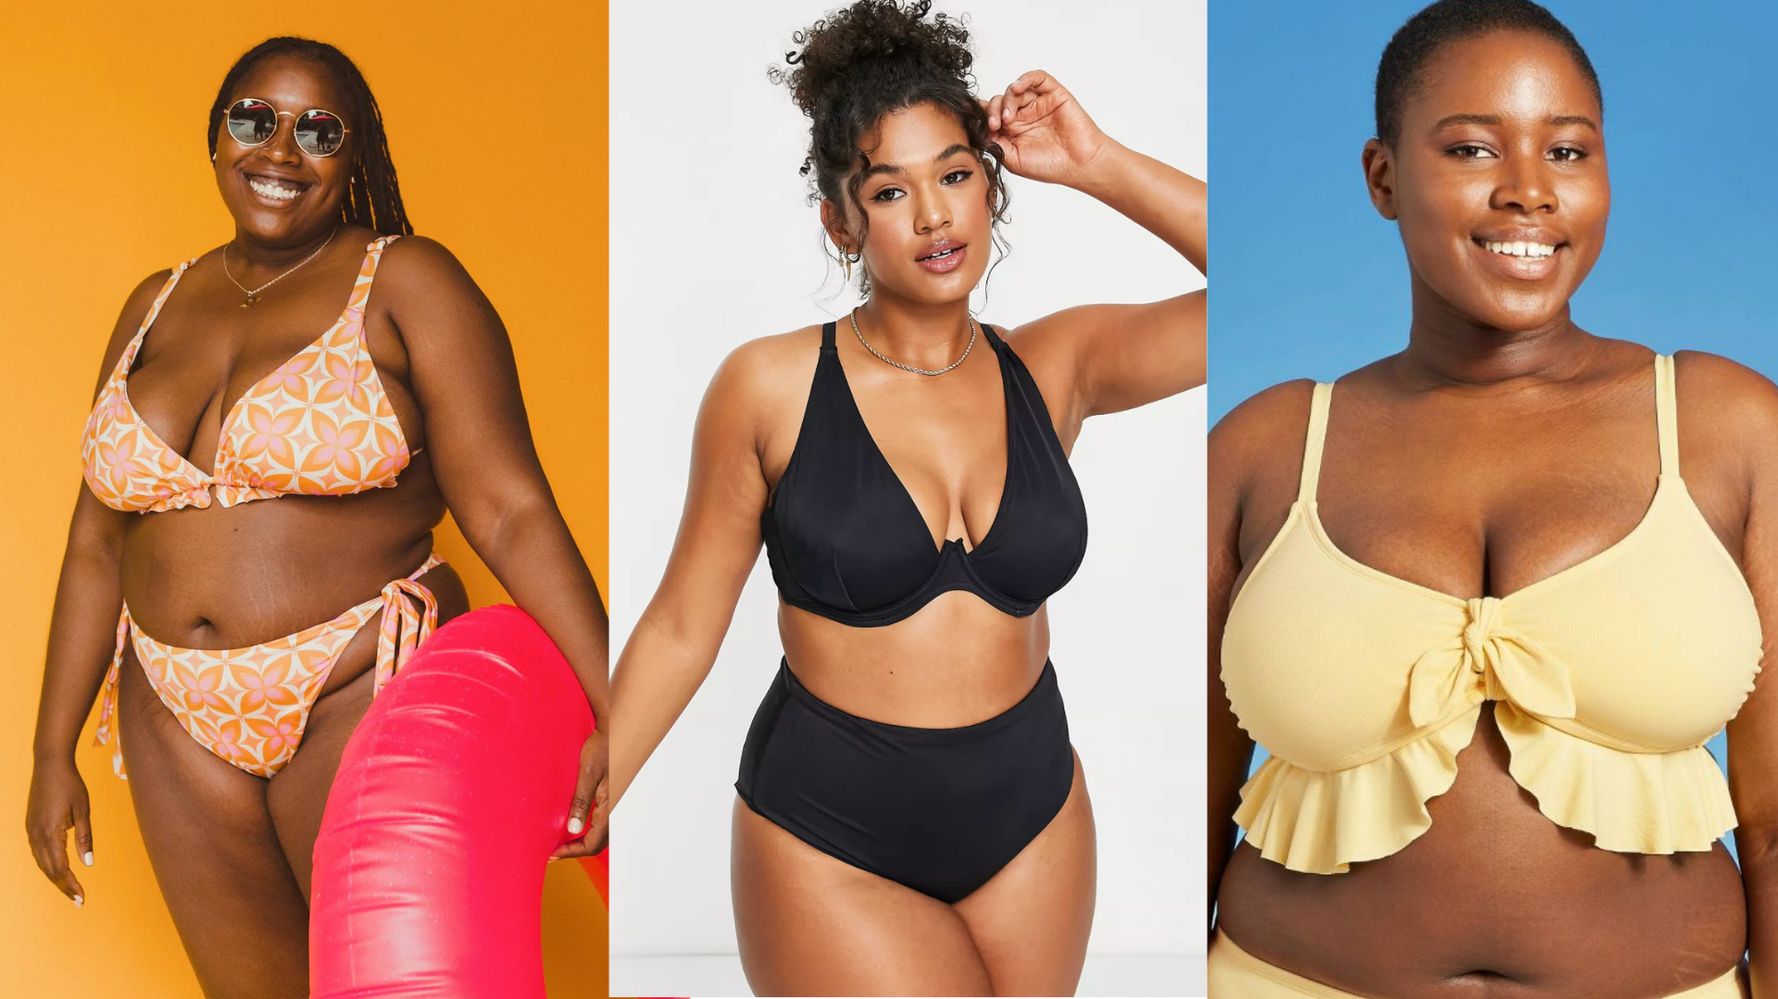 All You Need to Know About Swimwear for Big Busts